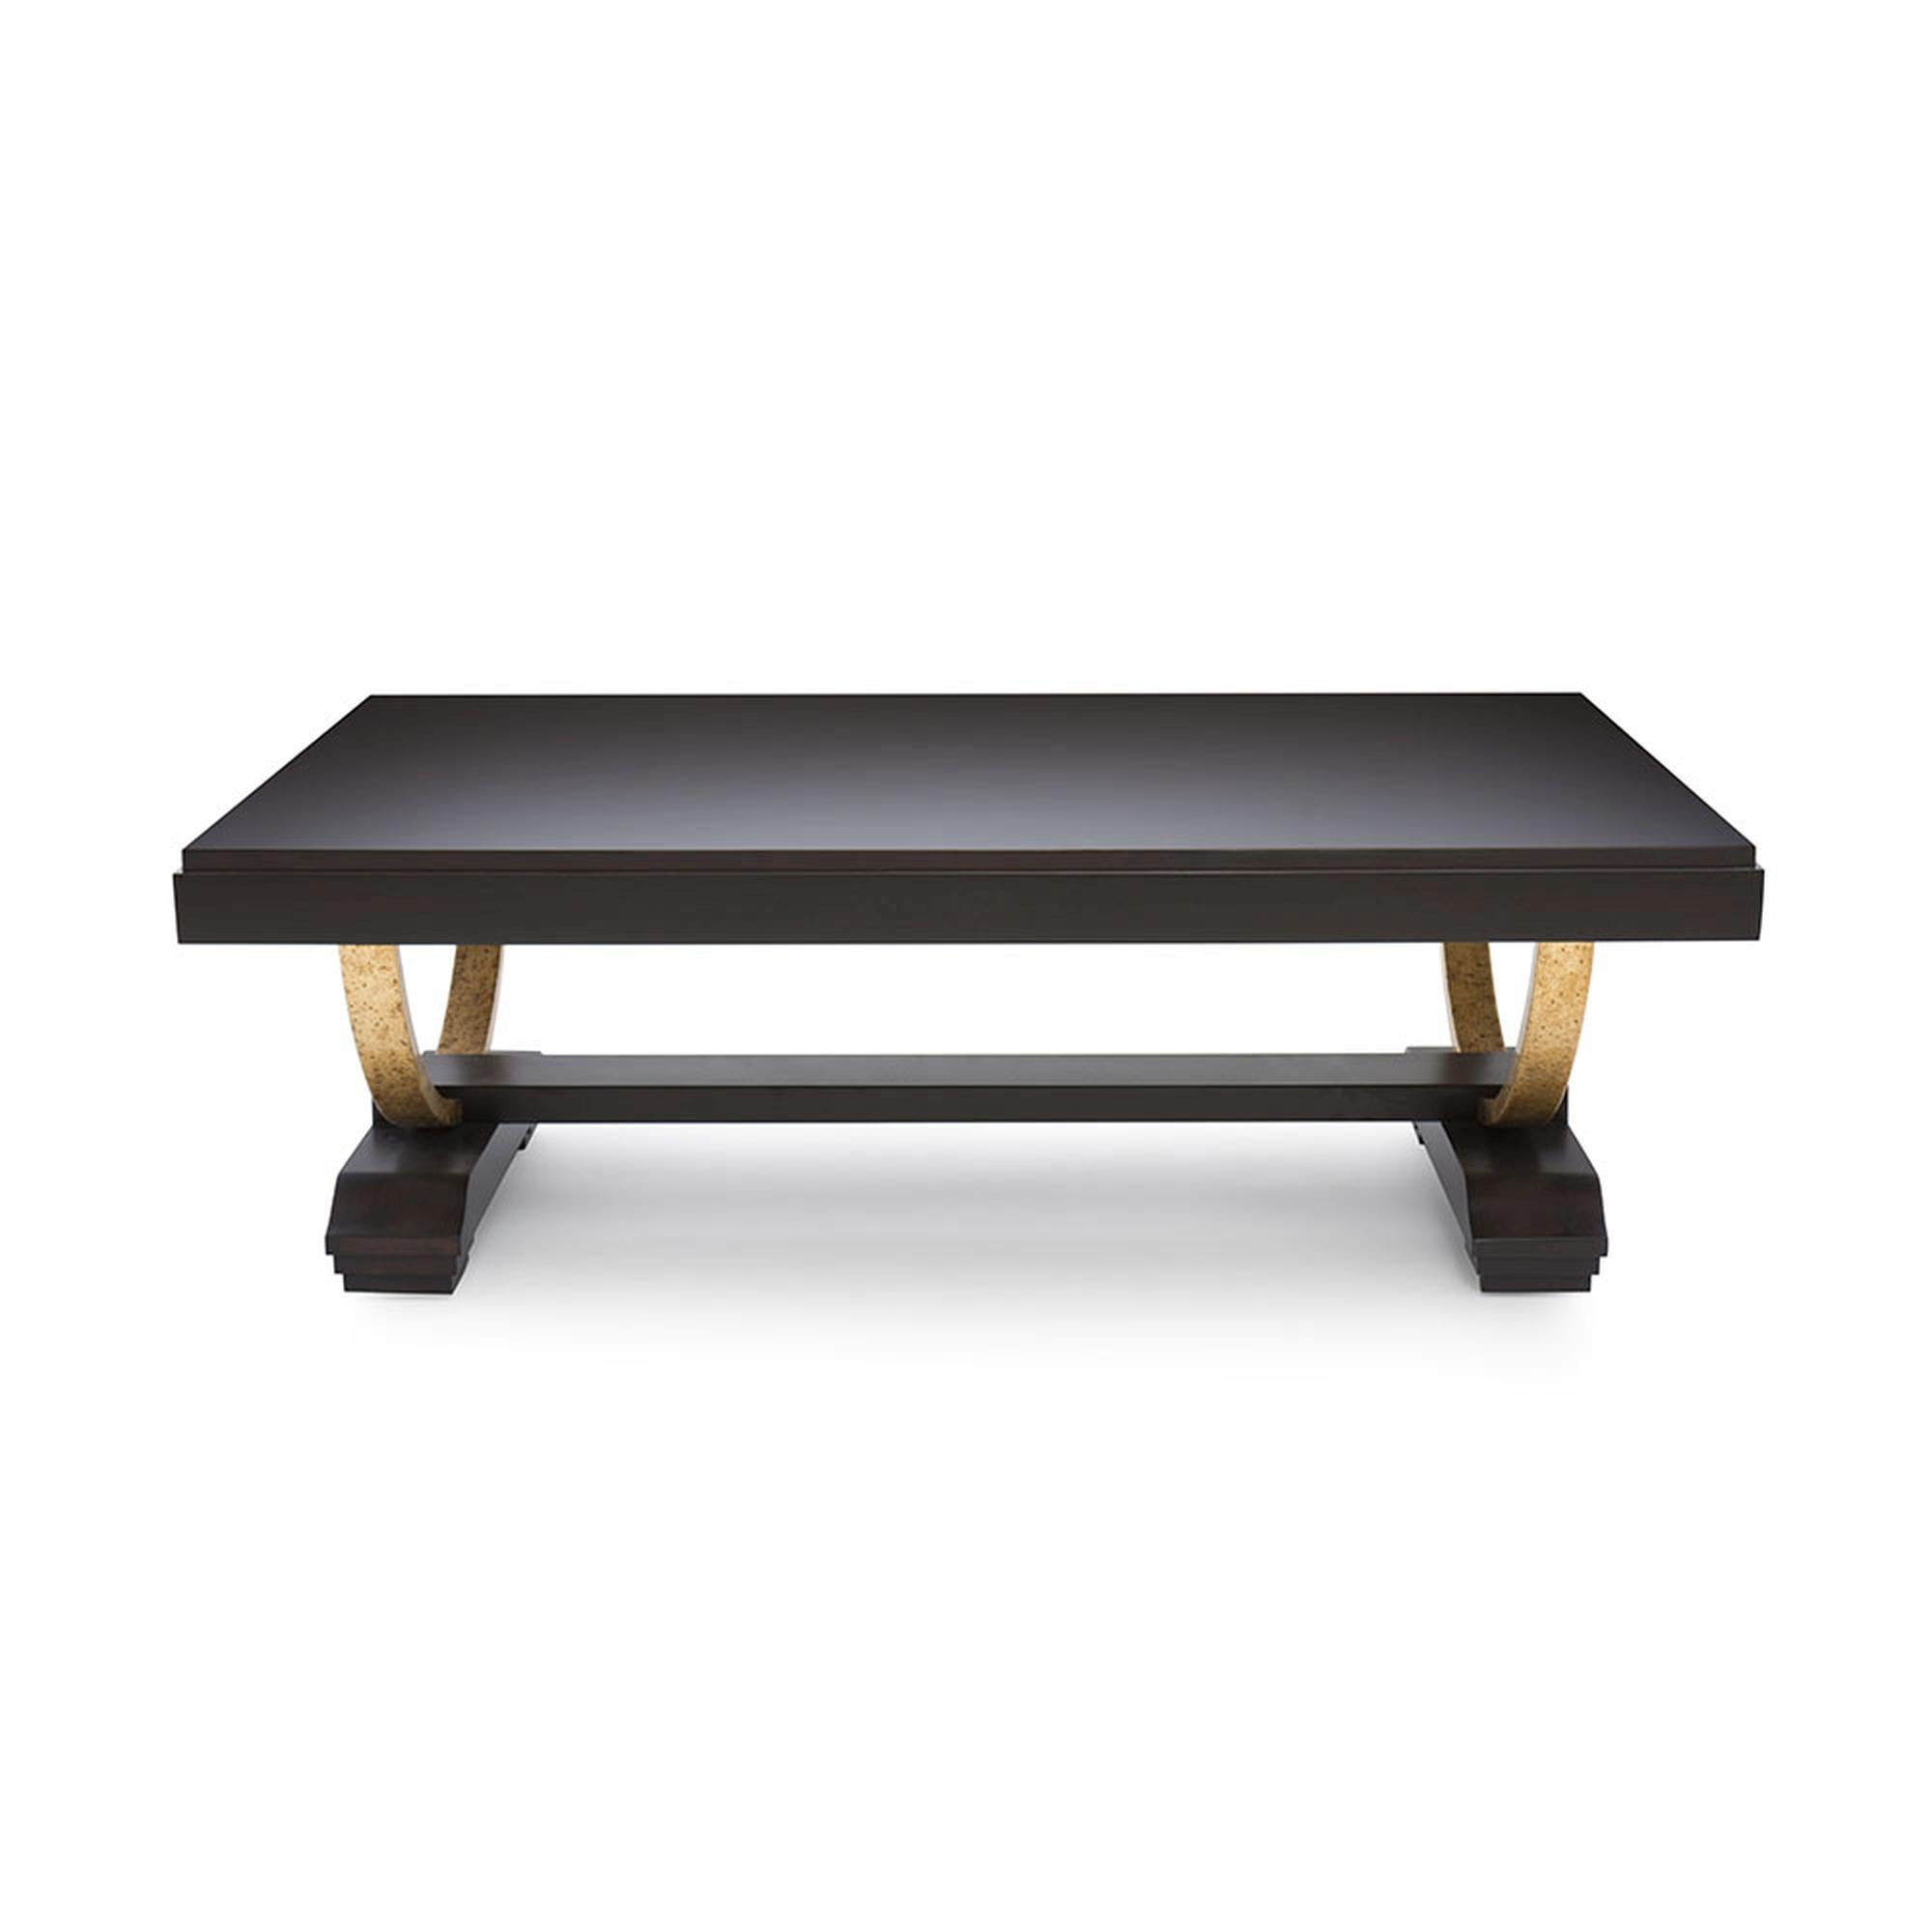 With an updated classic design, the Bel Air coffee table is a work of art. A sturdy, substantial wooden tabletop rests on u-shaped metal legs, ultimately supported by a wooden base. Handcrafted to perfection, the table is a beautiful centerpiece for